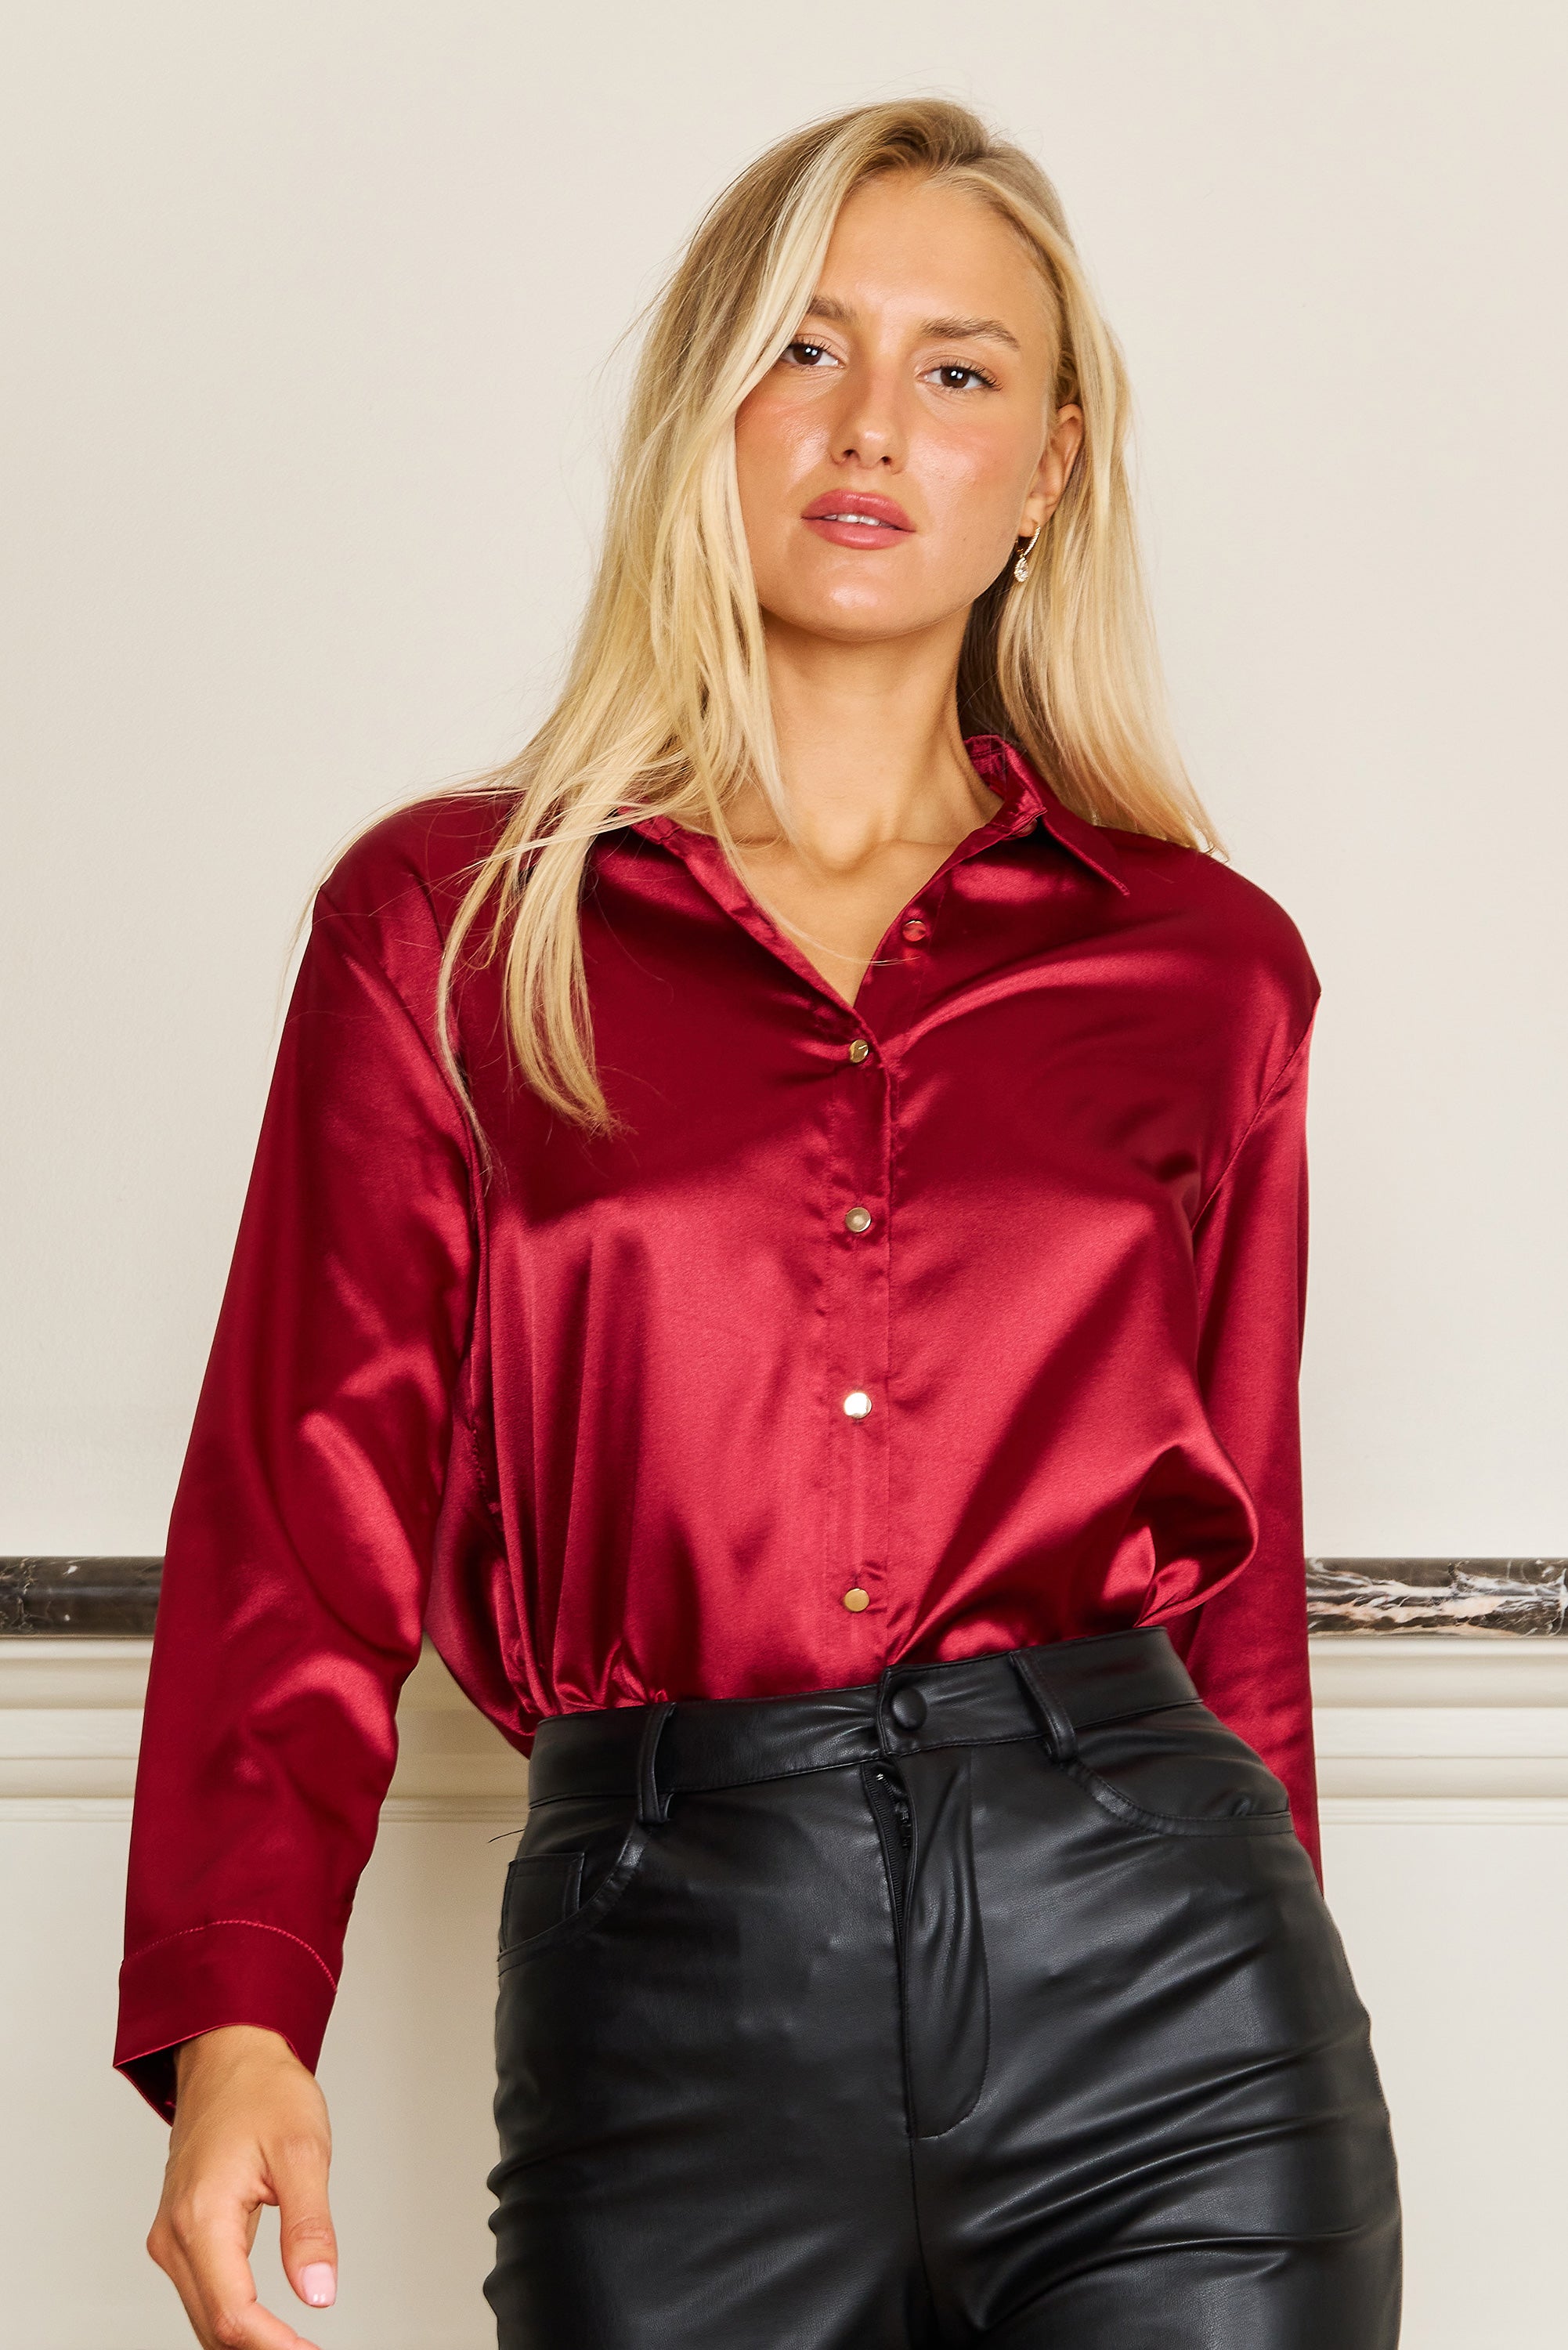 Top Formal Satin Long Sleeve Button Down Blouse Top Burgundy